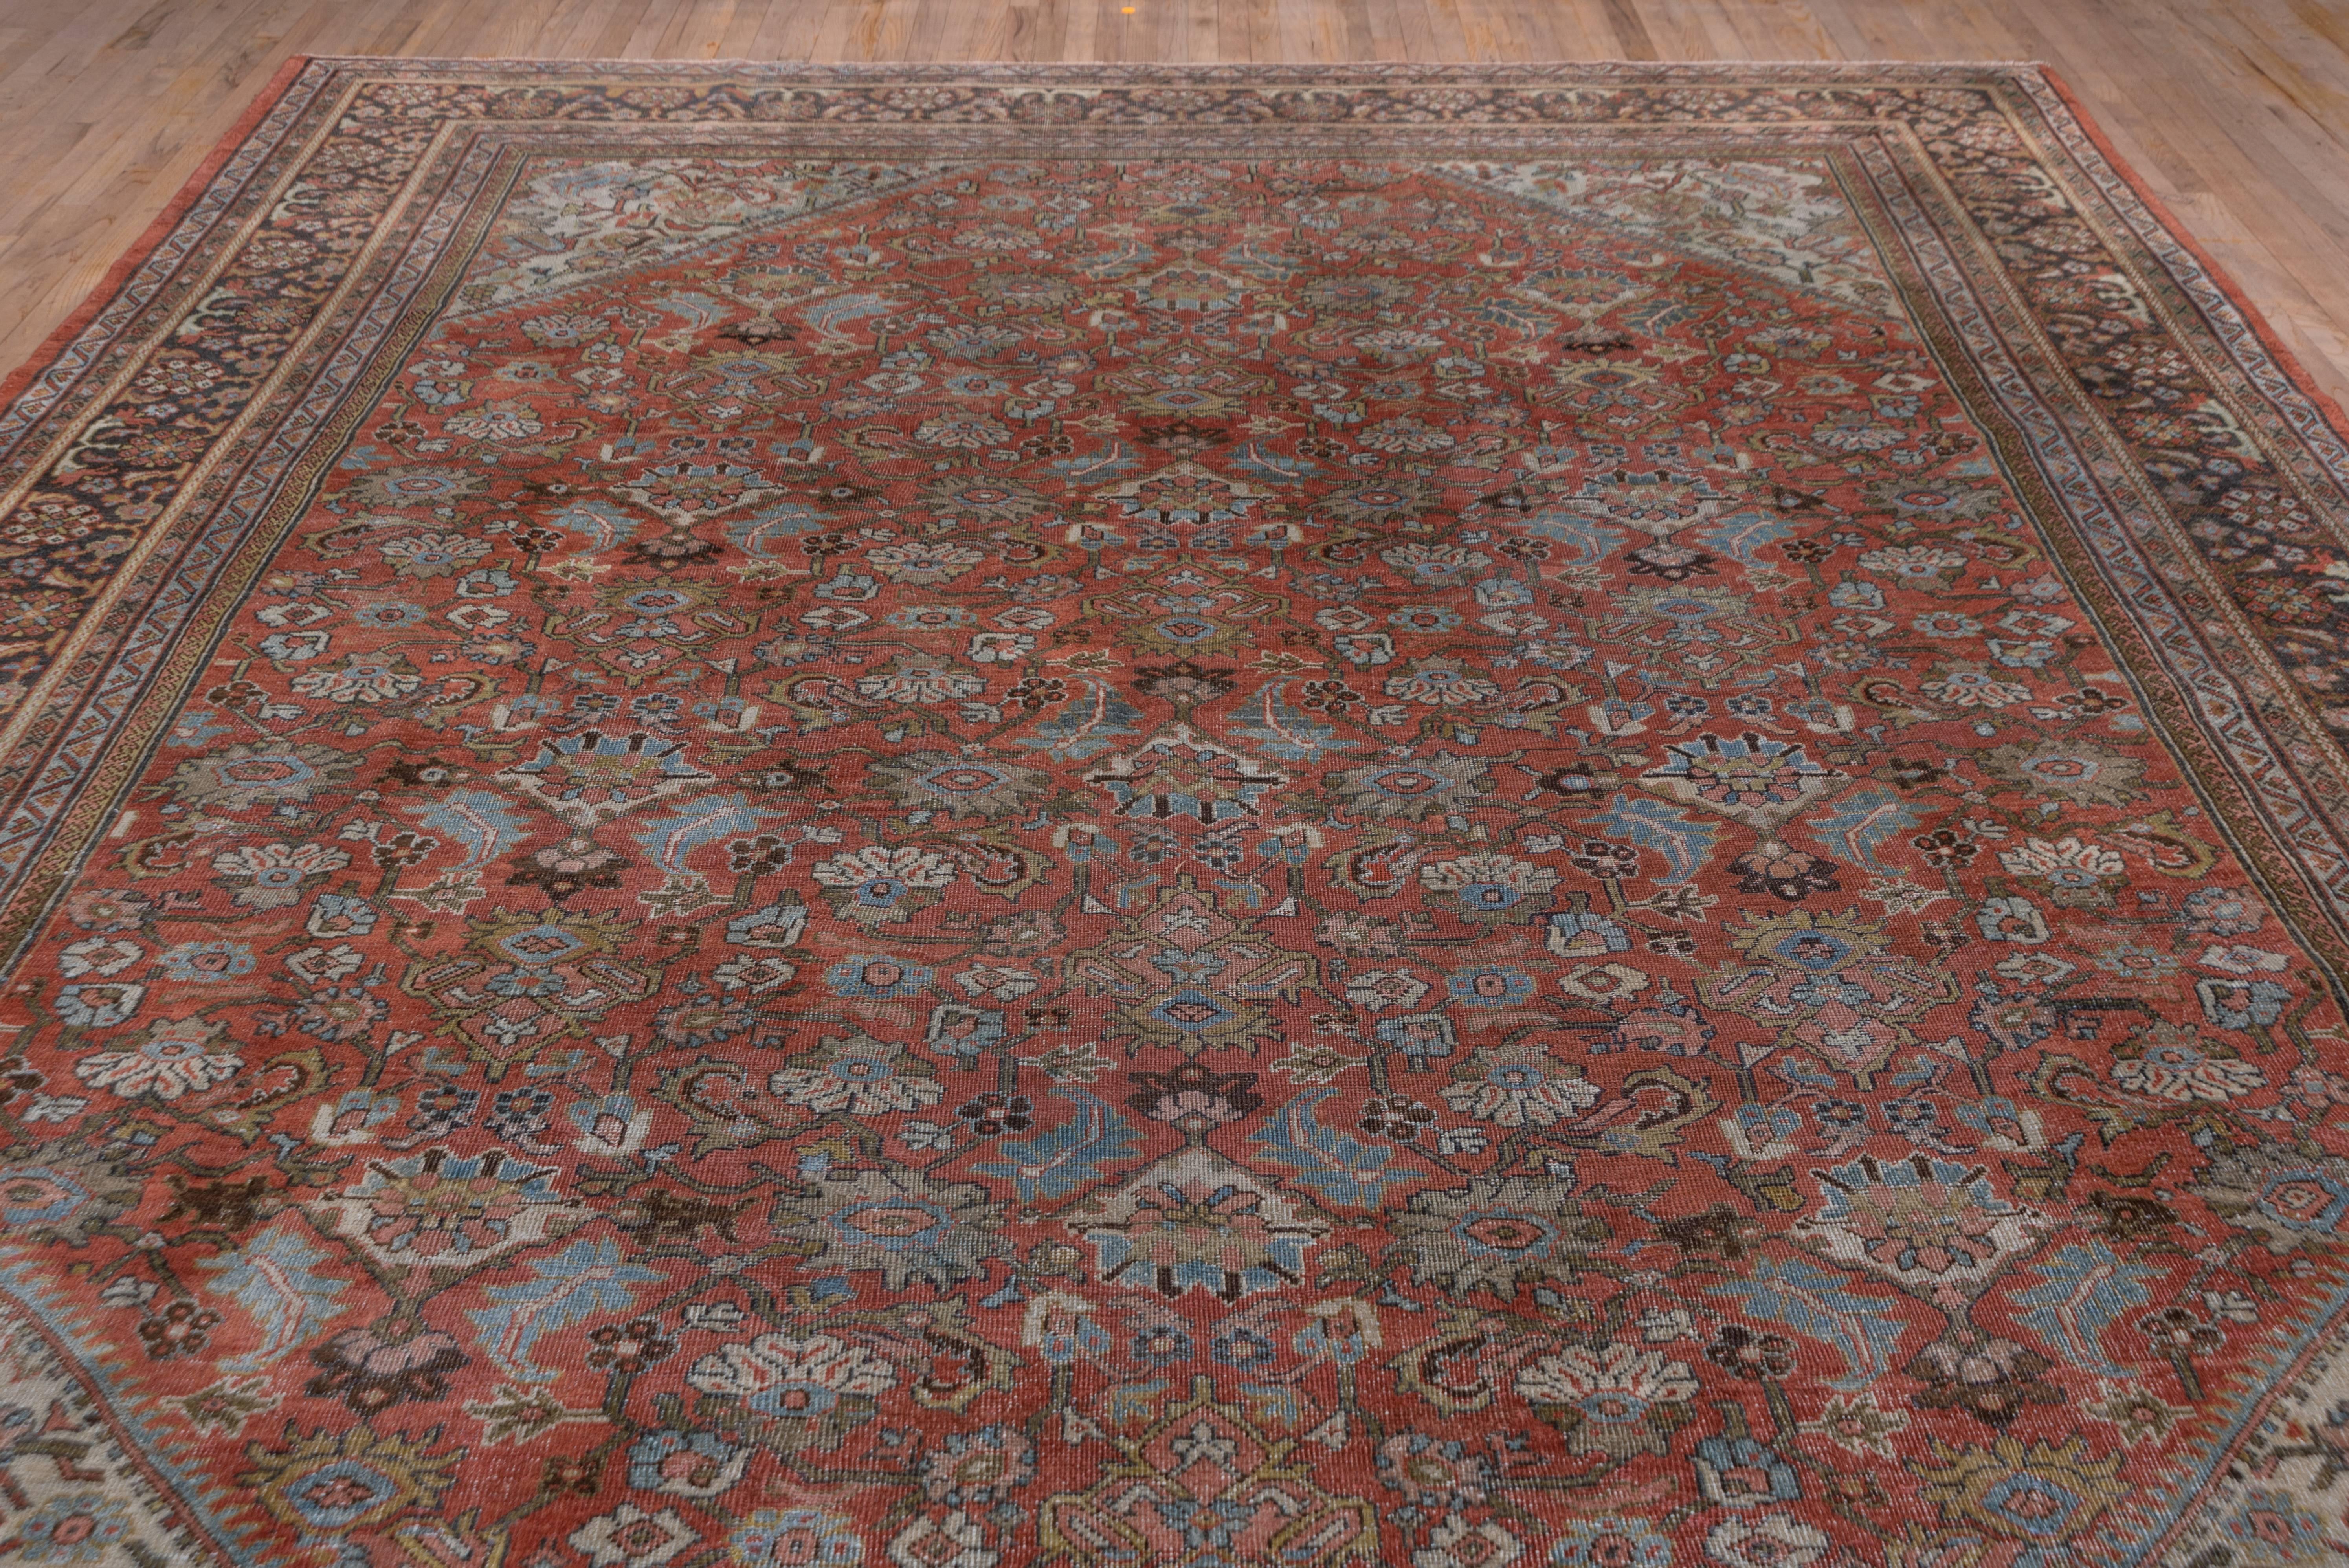 Turquoise accents abound in the rust field of this all-over design west Persian village carpet. Stylized carnations, curved leaves and various palmettes basically float freely without an underlying connecting tracery. The olive border displays two